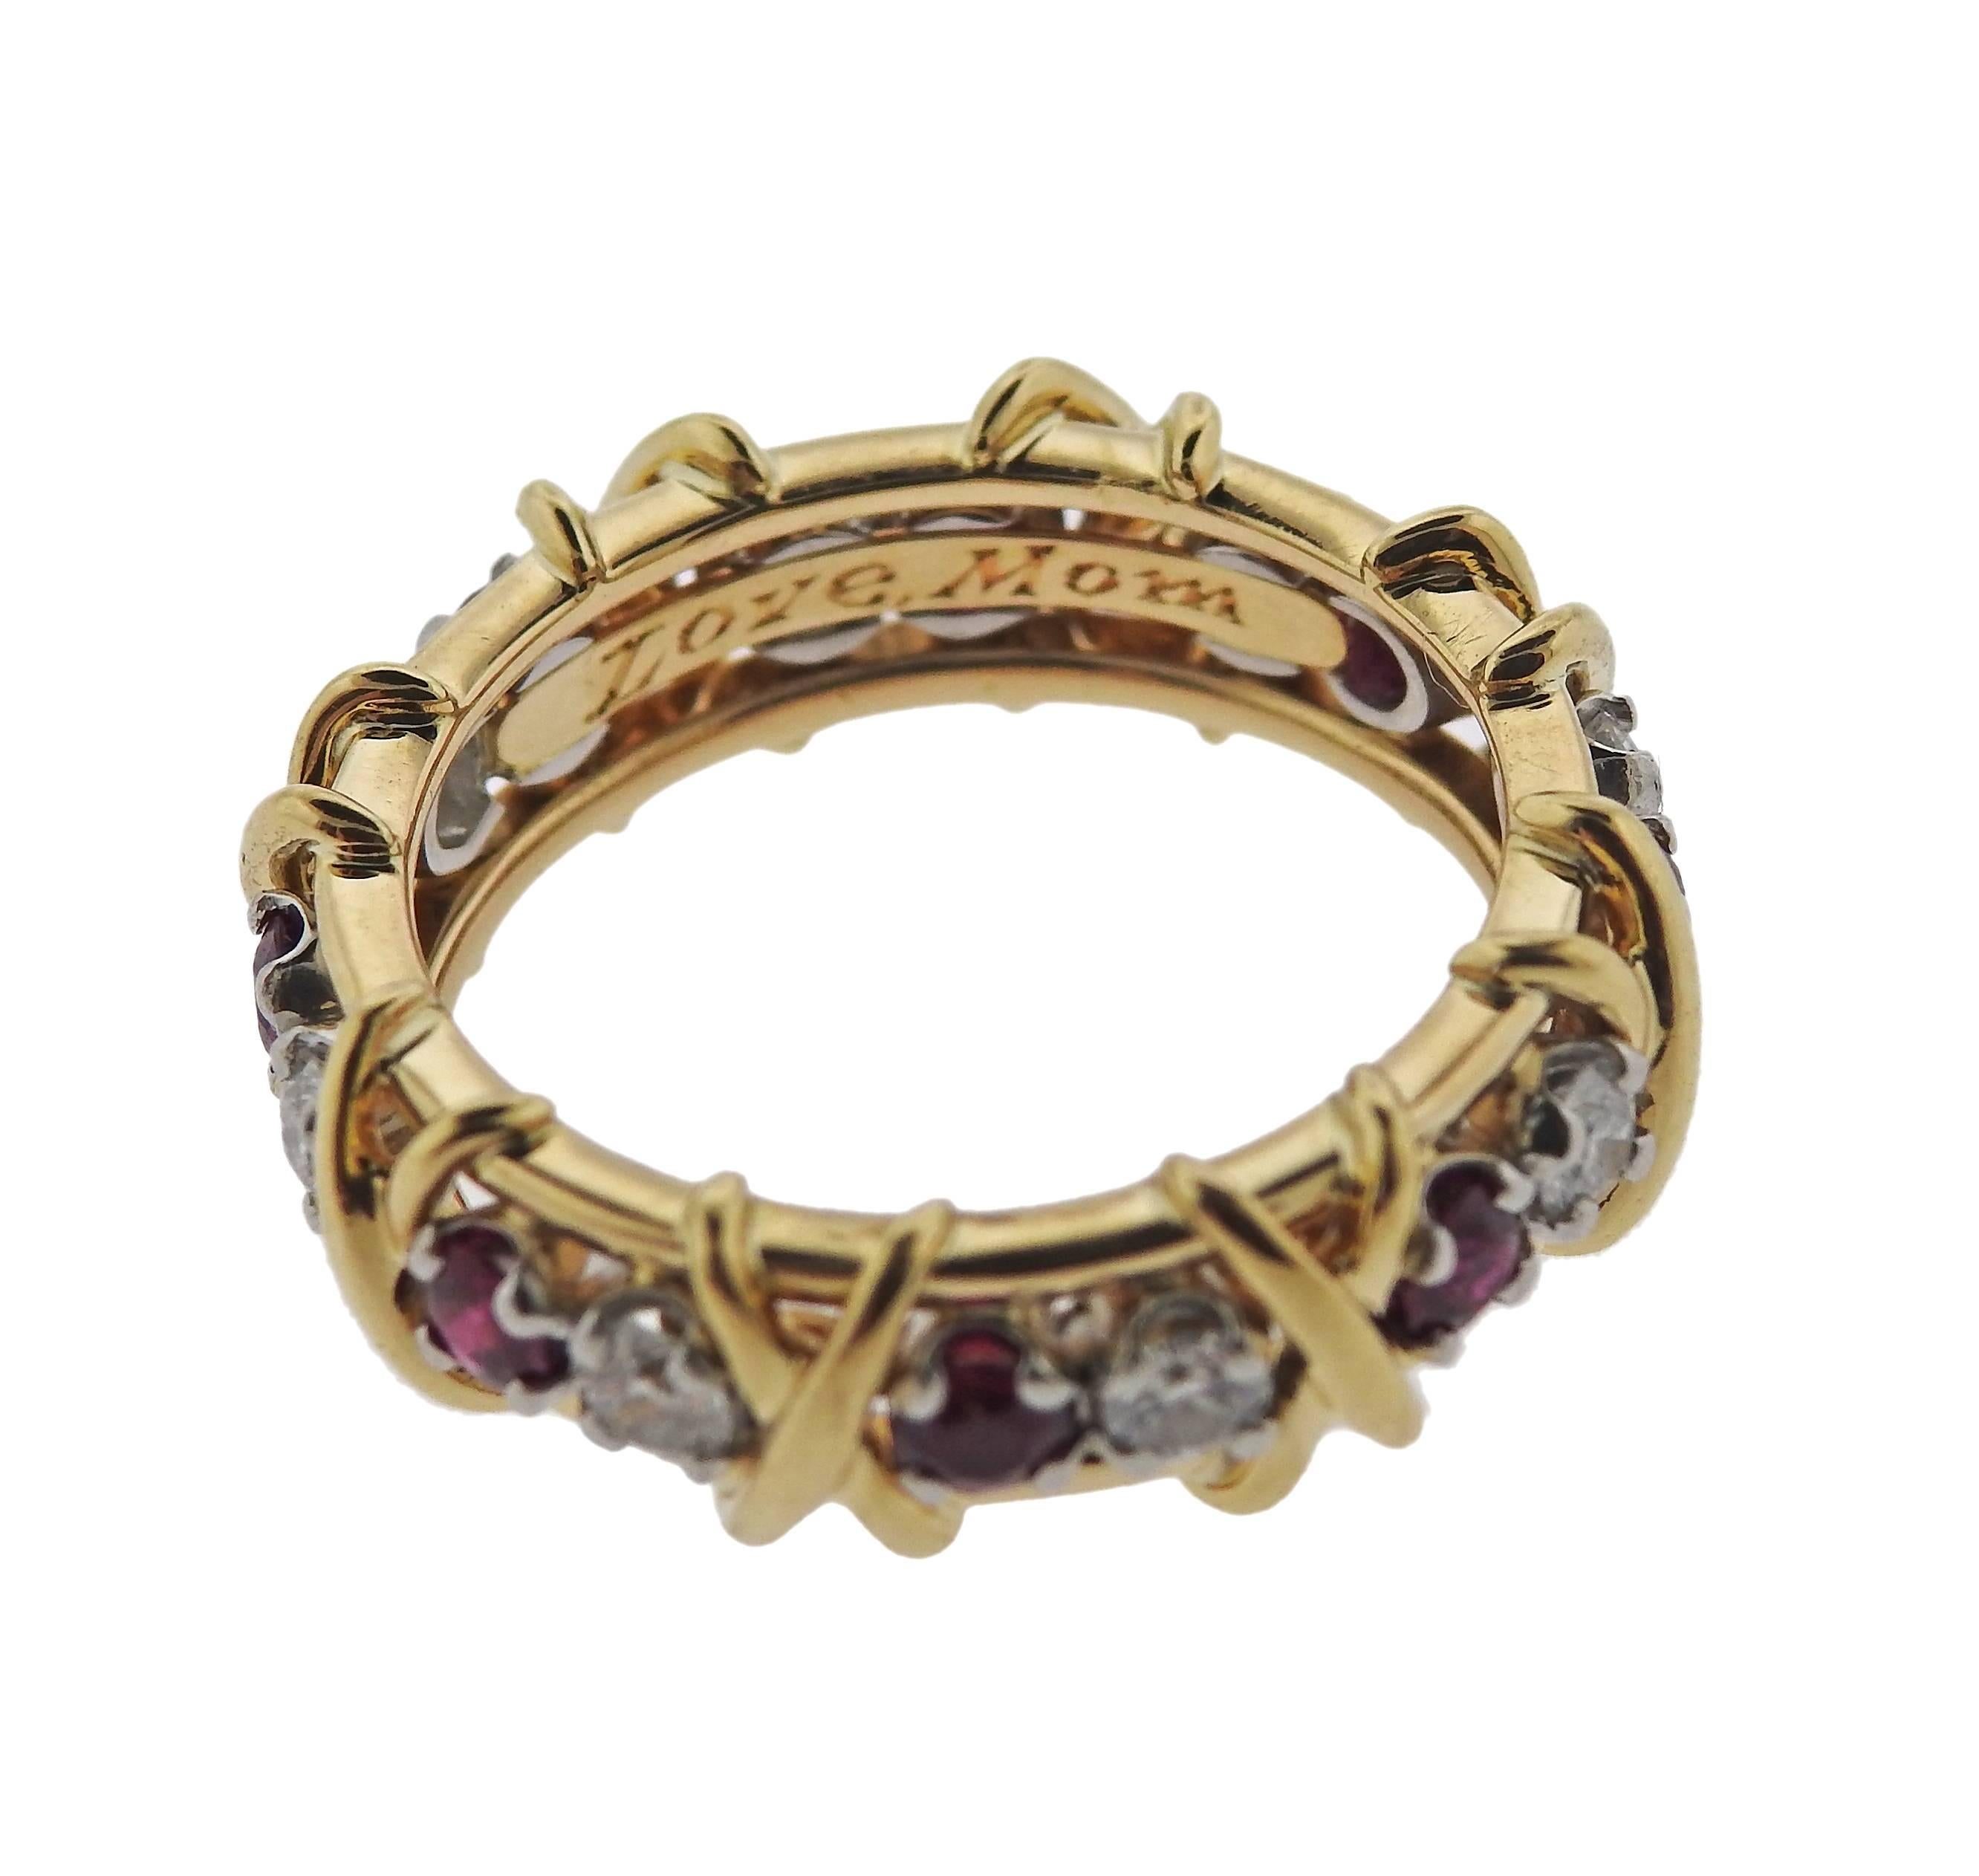 Classic Sixteen stone ring, created by Jean Schlumberger for Tiffany & Co, set in 18k yellow gold and platinum, featuring 0.65ctw in diamonds and rubies. Ring size - 7, ring is 6.7mm wide, marked: pt950, 750, Tiffany & Co, Schlumberger